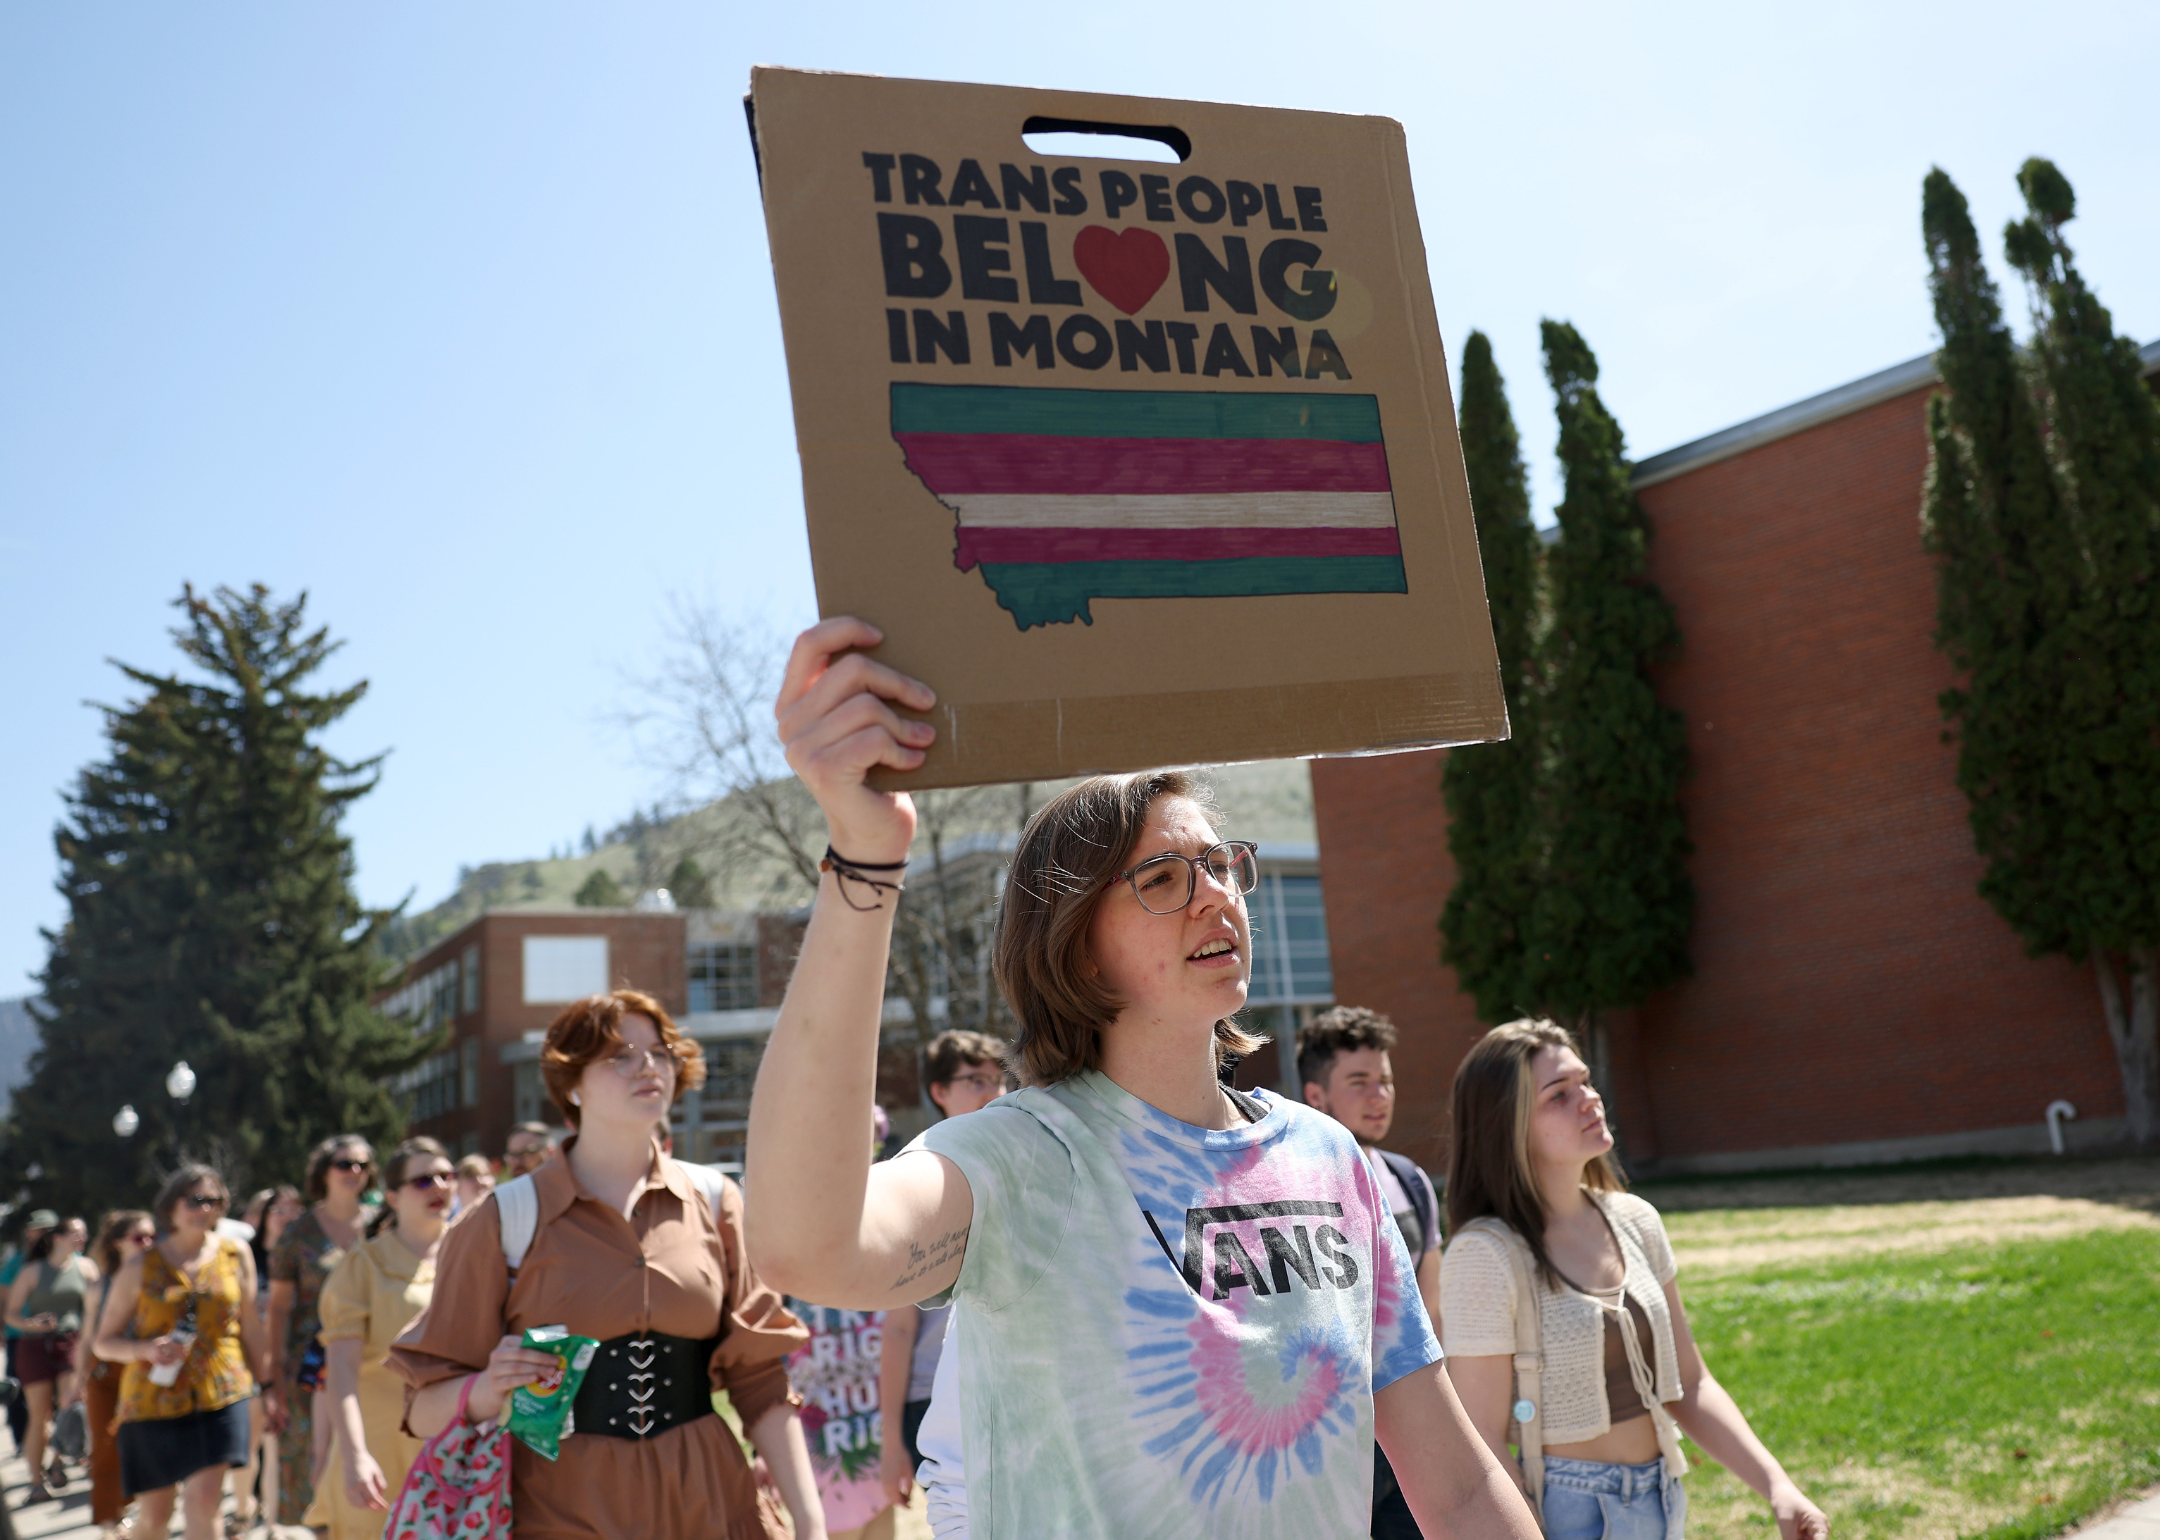 March for transgender rights in Montana